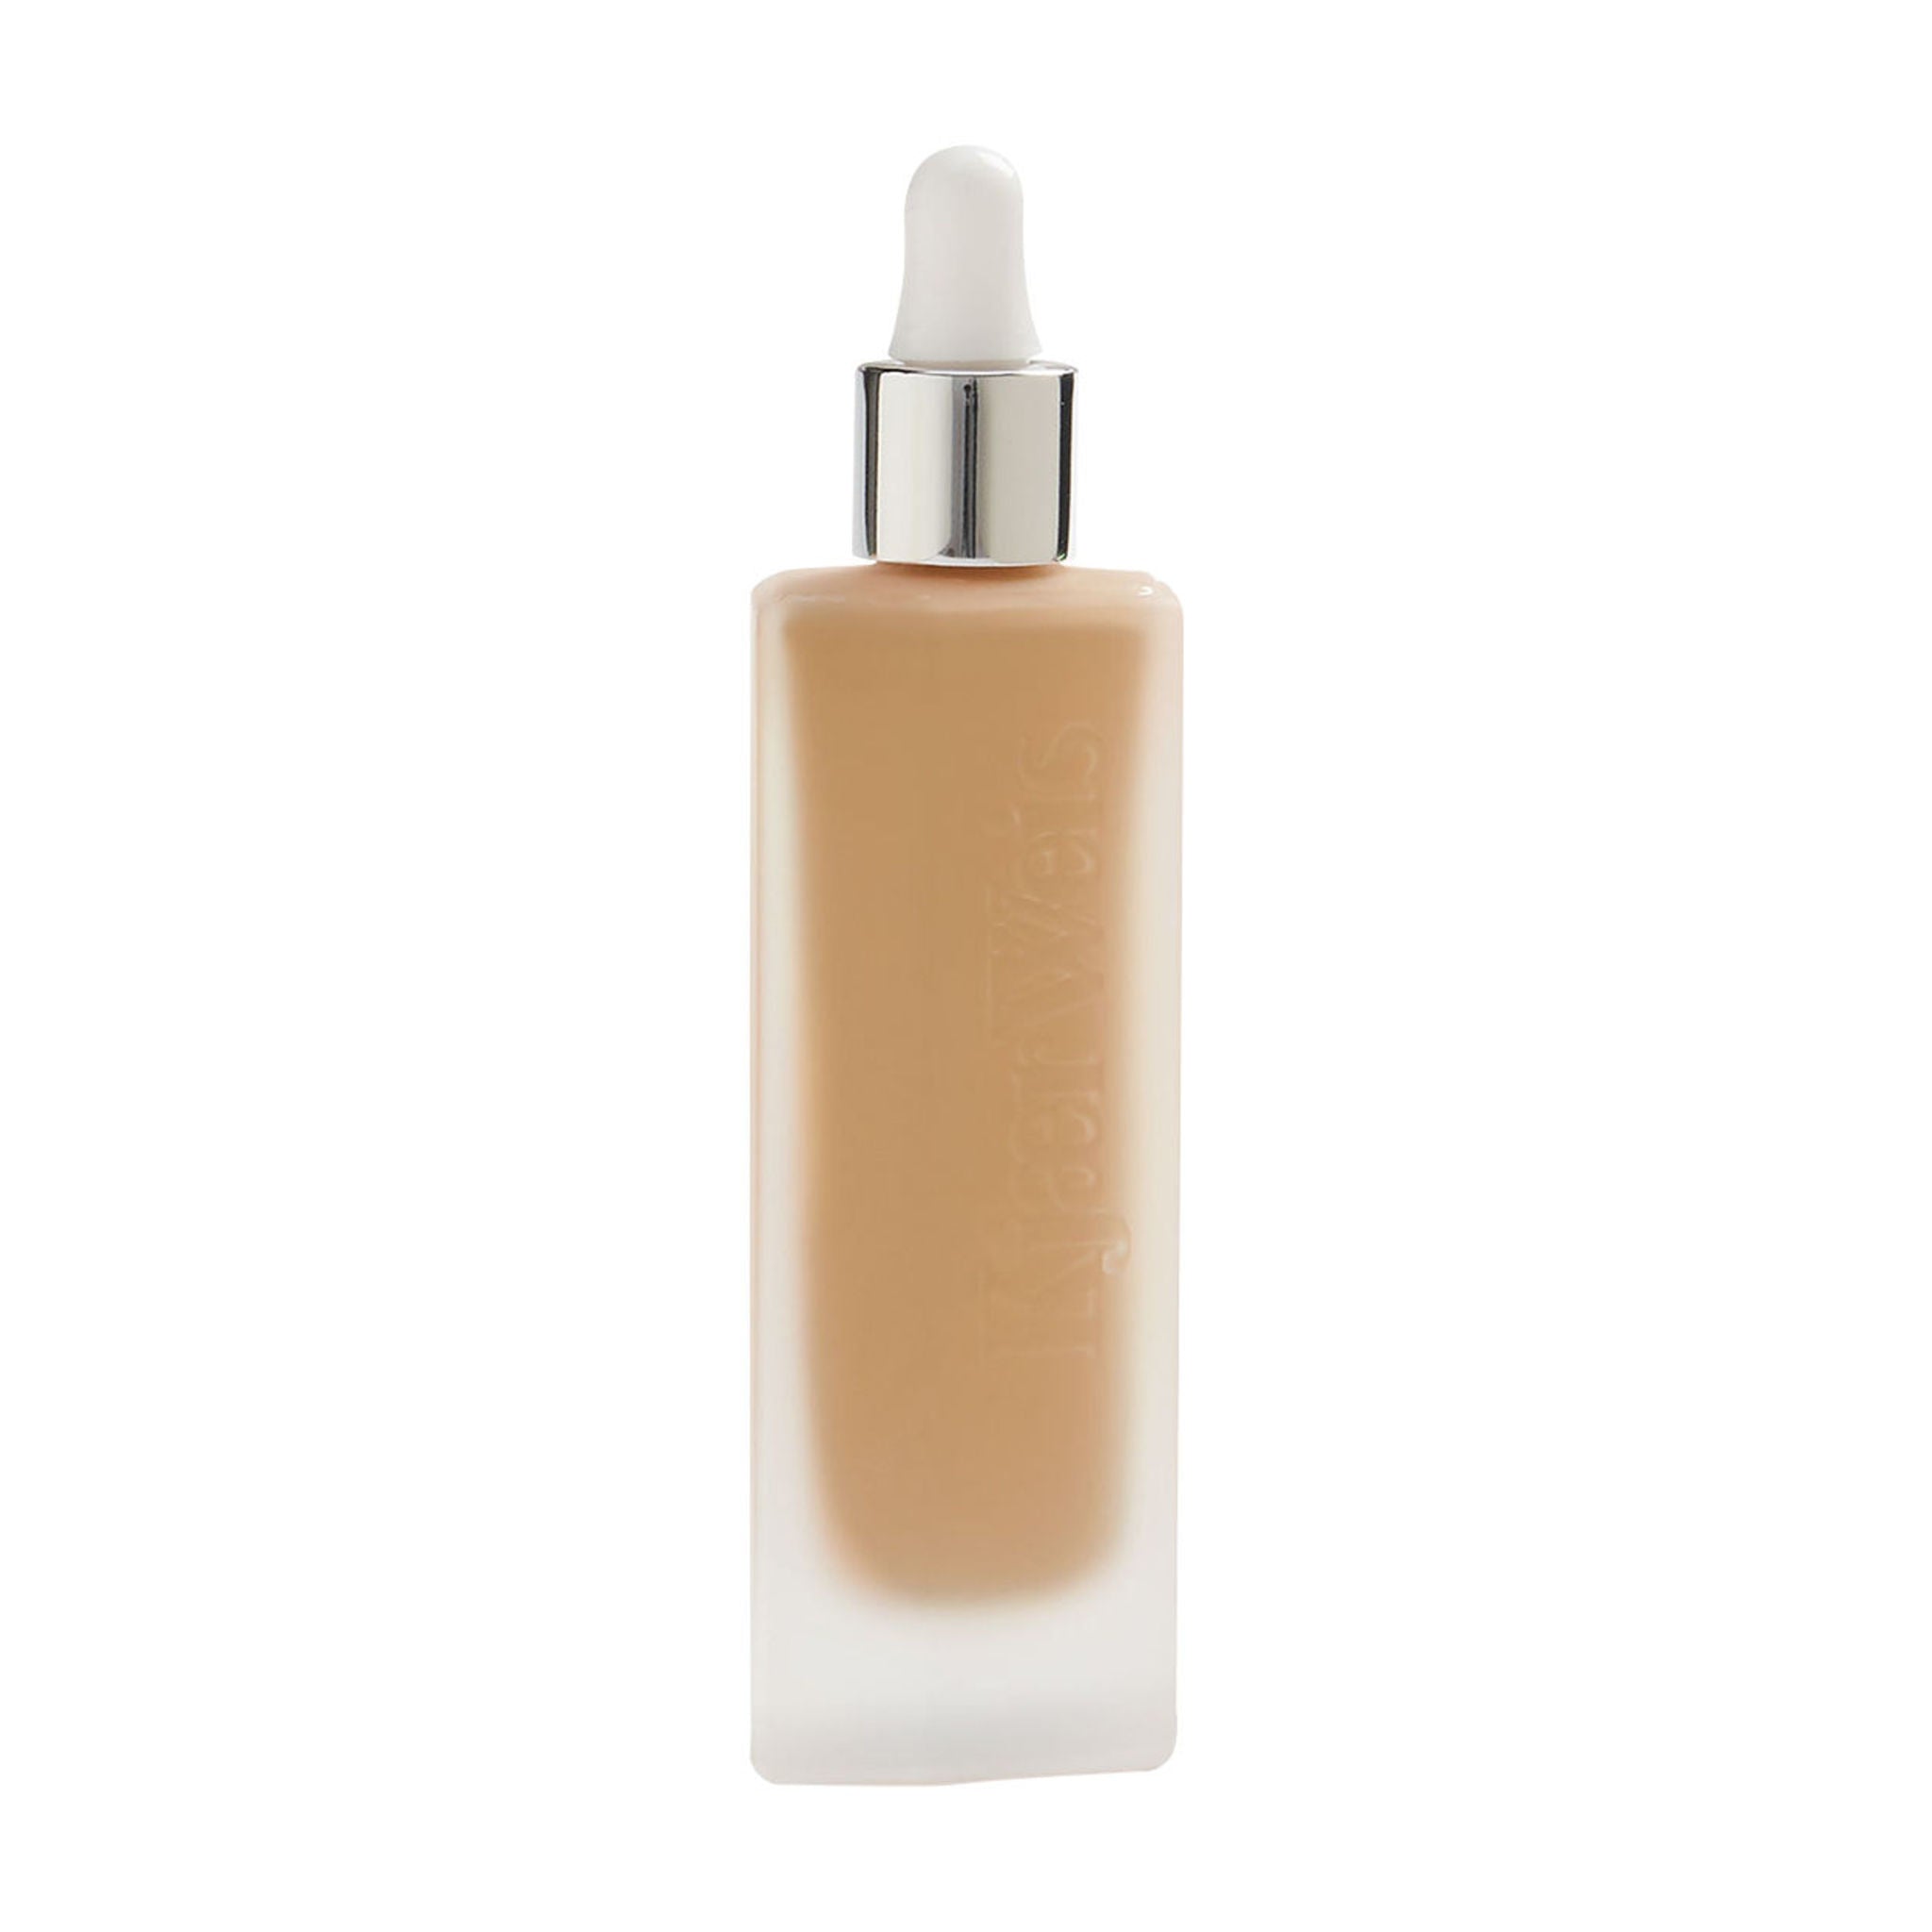 Kjaer Weis Invisible Touch Liquid Foundation Color/Shade variant: Polished M224 main image. This product is for medium cool golden complexions